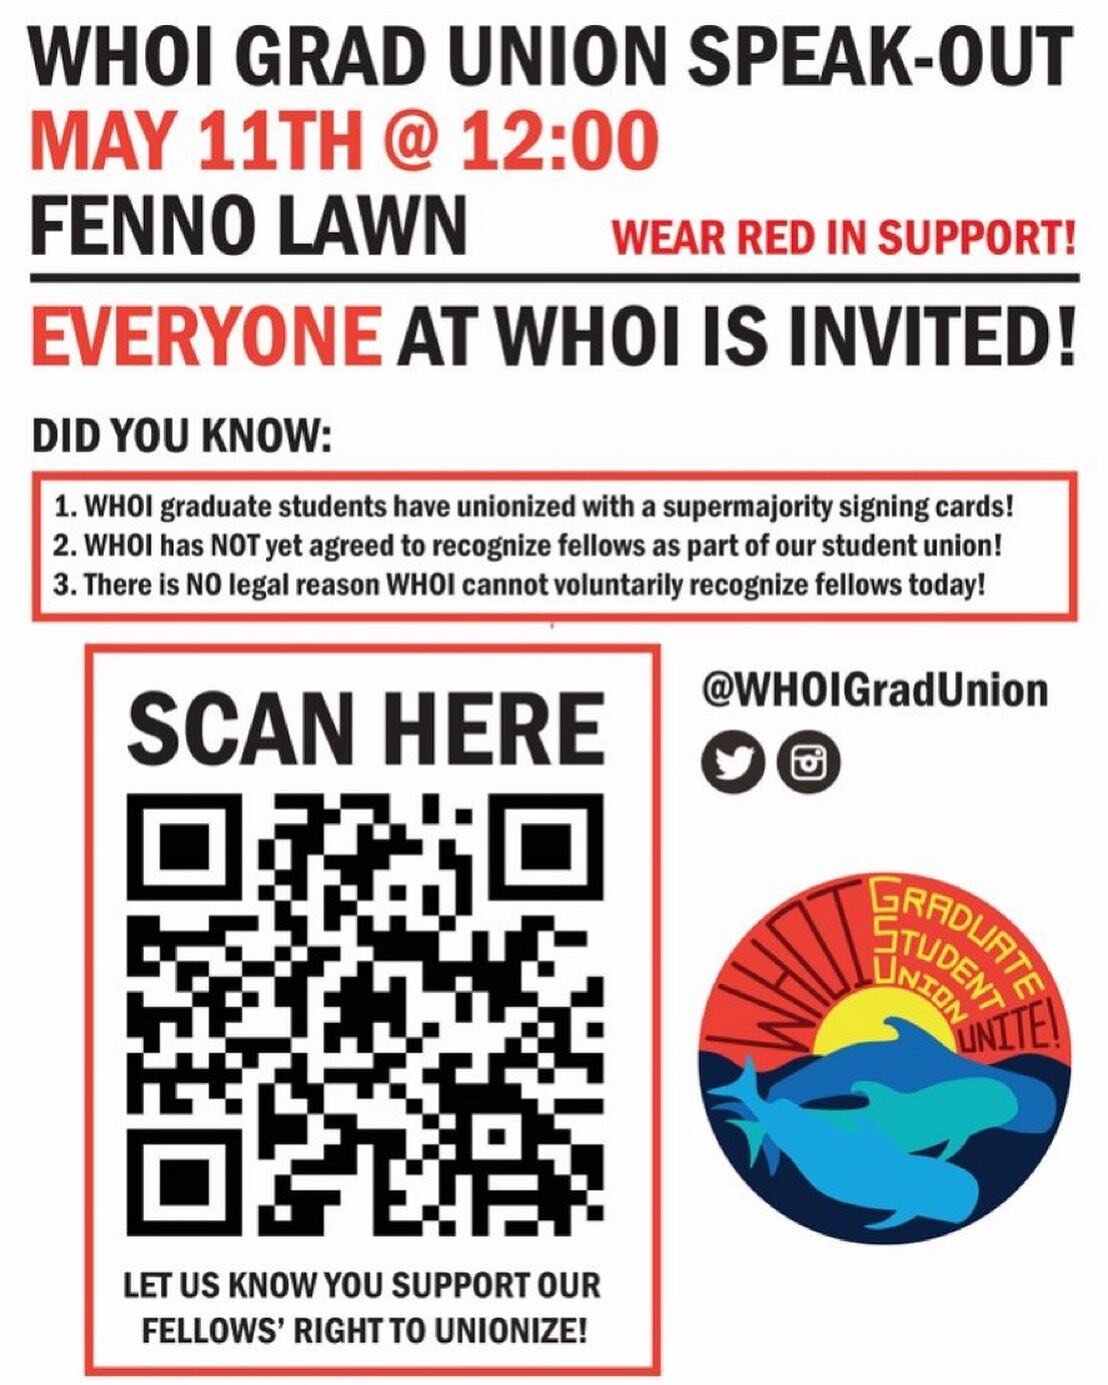 Come out to FENNO patio today at noon to show your support for inclusion of ALL graduate workers in the WHOI Graduate Union ☀️